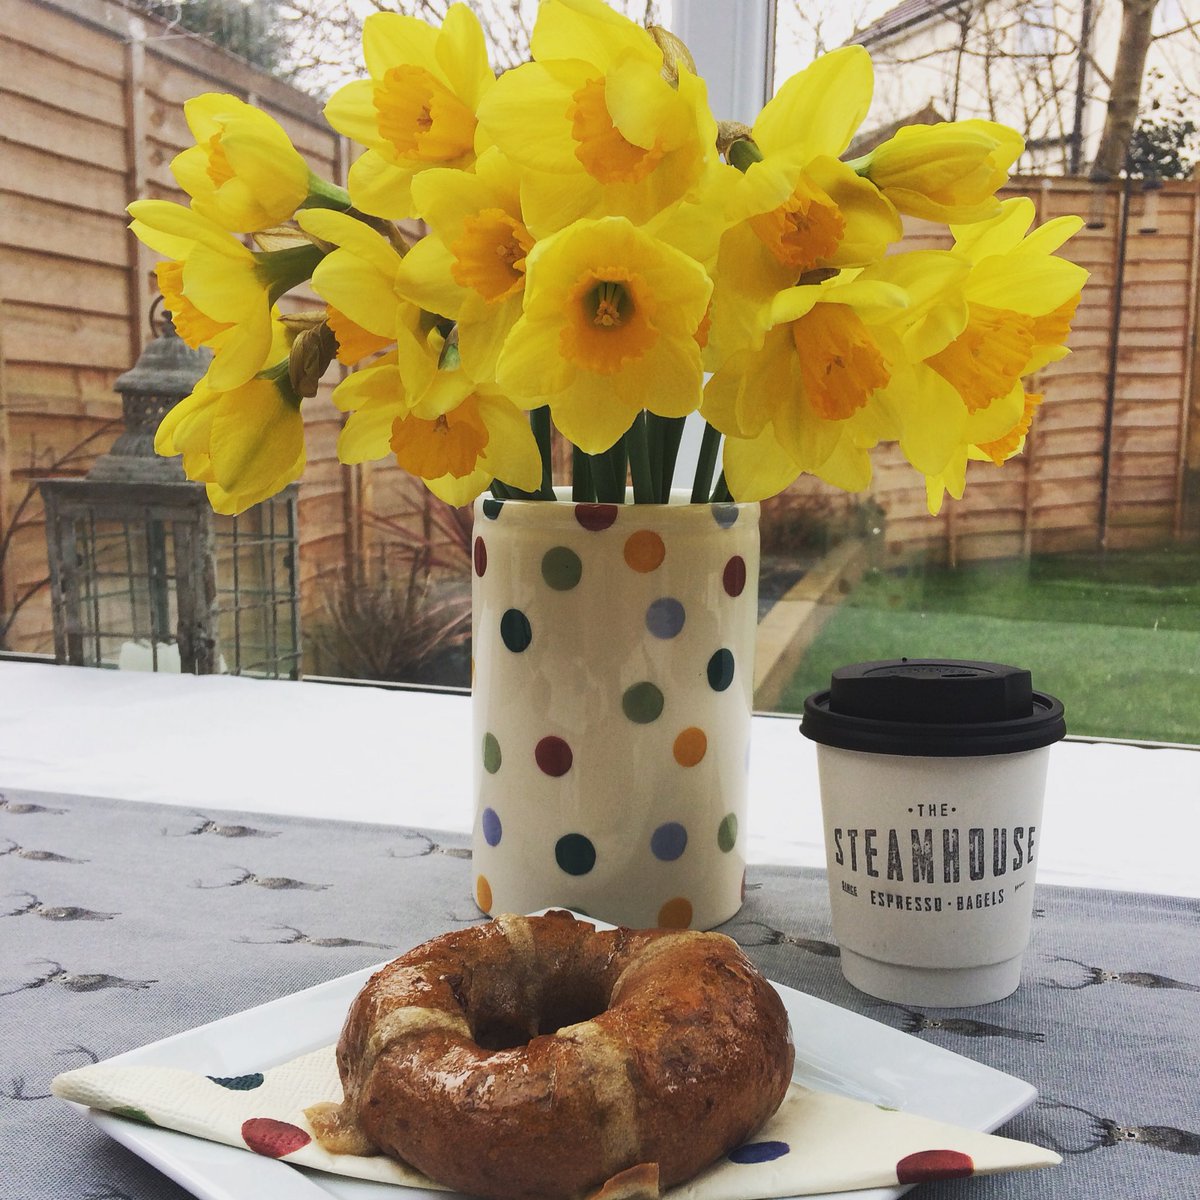 Loving the hot cross bagels from @TheSteamhouseCo! 👌 #thesteamhouseleamington #thesteamhouse #hotcrossbagels #hotcrossbuns #bagels #hxb  #leamingtonspa #food #eat #foodblog #foodblogger #easter #daffodils #spring #eatdrinkandfortywinks